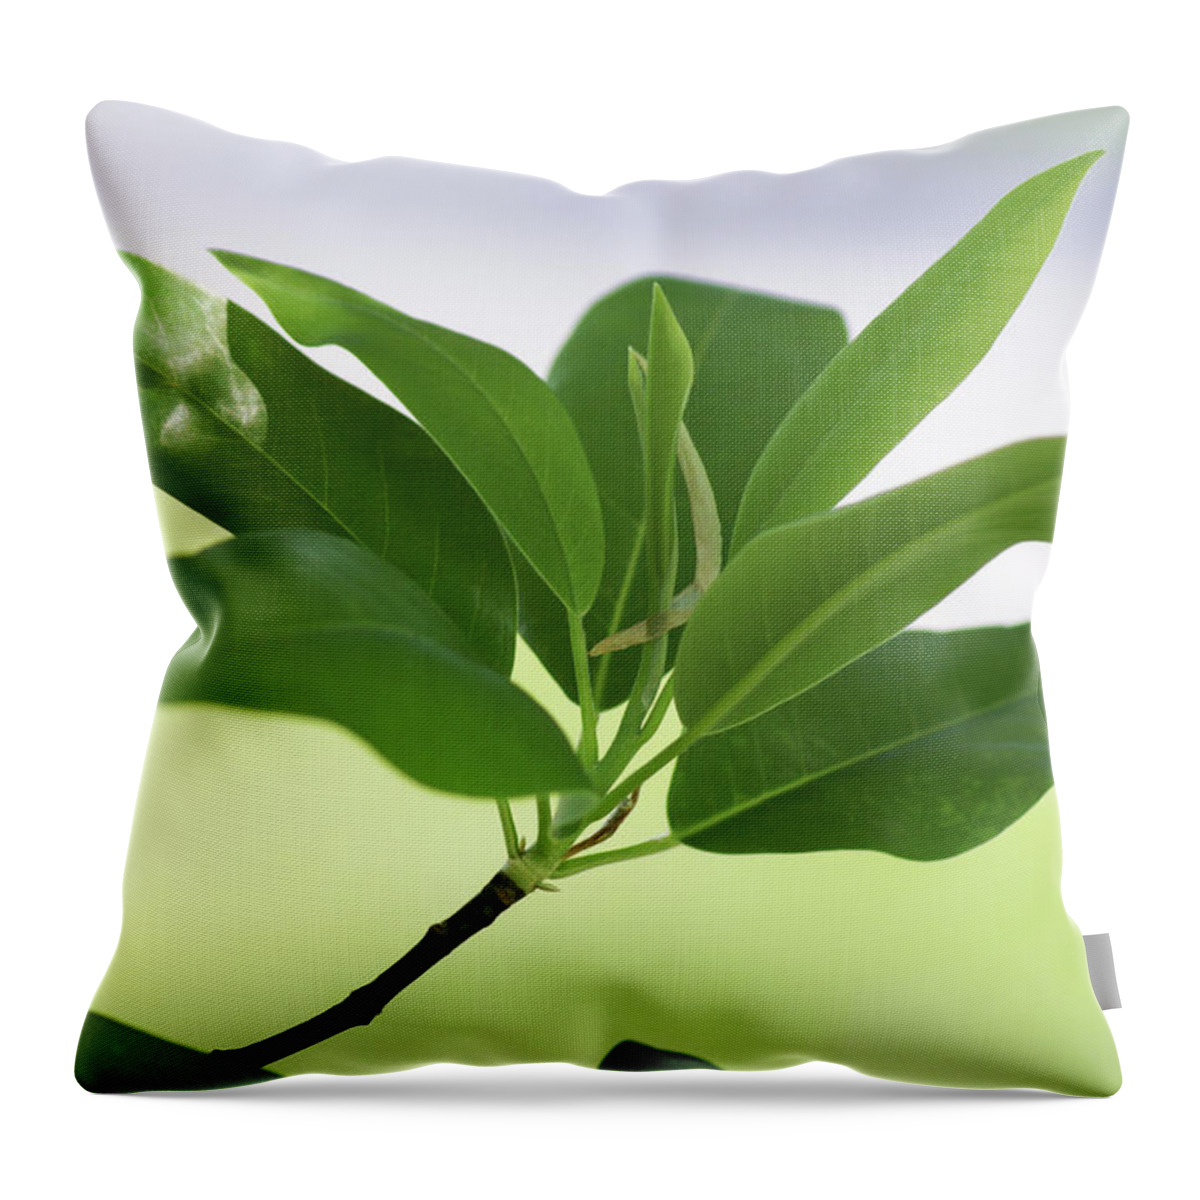  Throw Pillow featuring the photograph Sweetbay Magnolia Greens by Heather E Harman